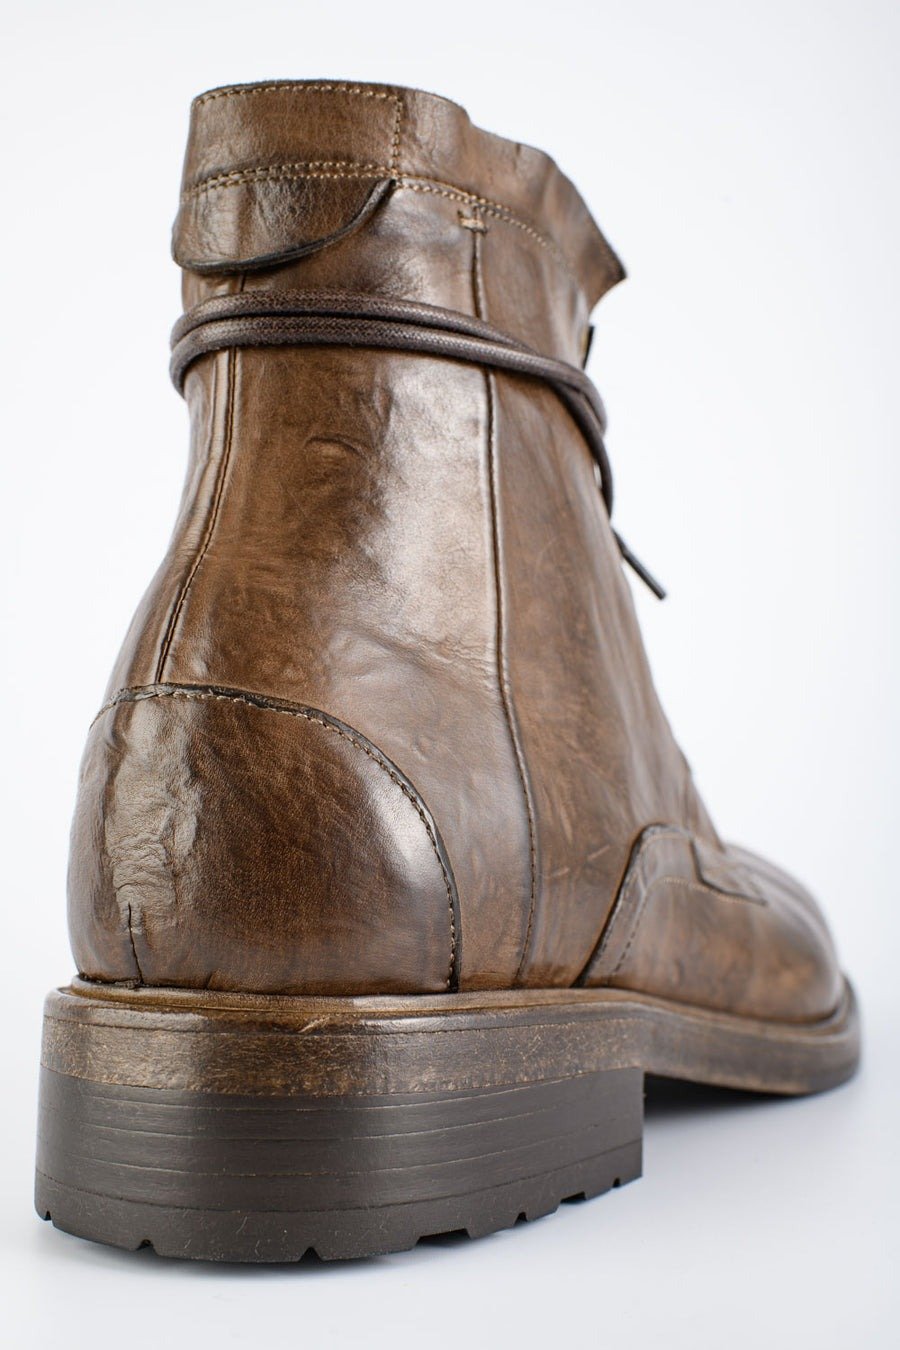 CURZON husk-brown military boots